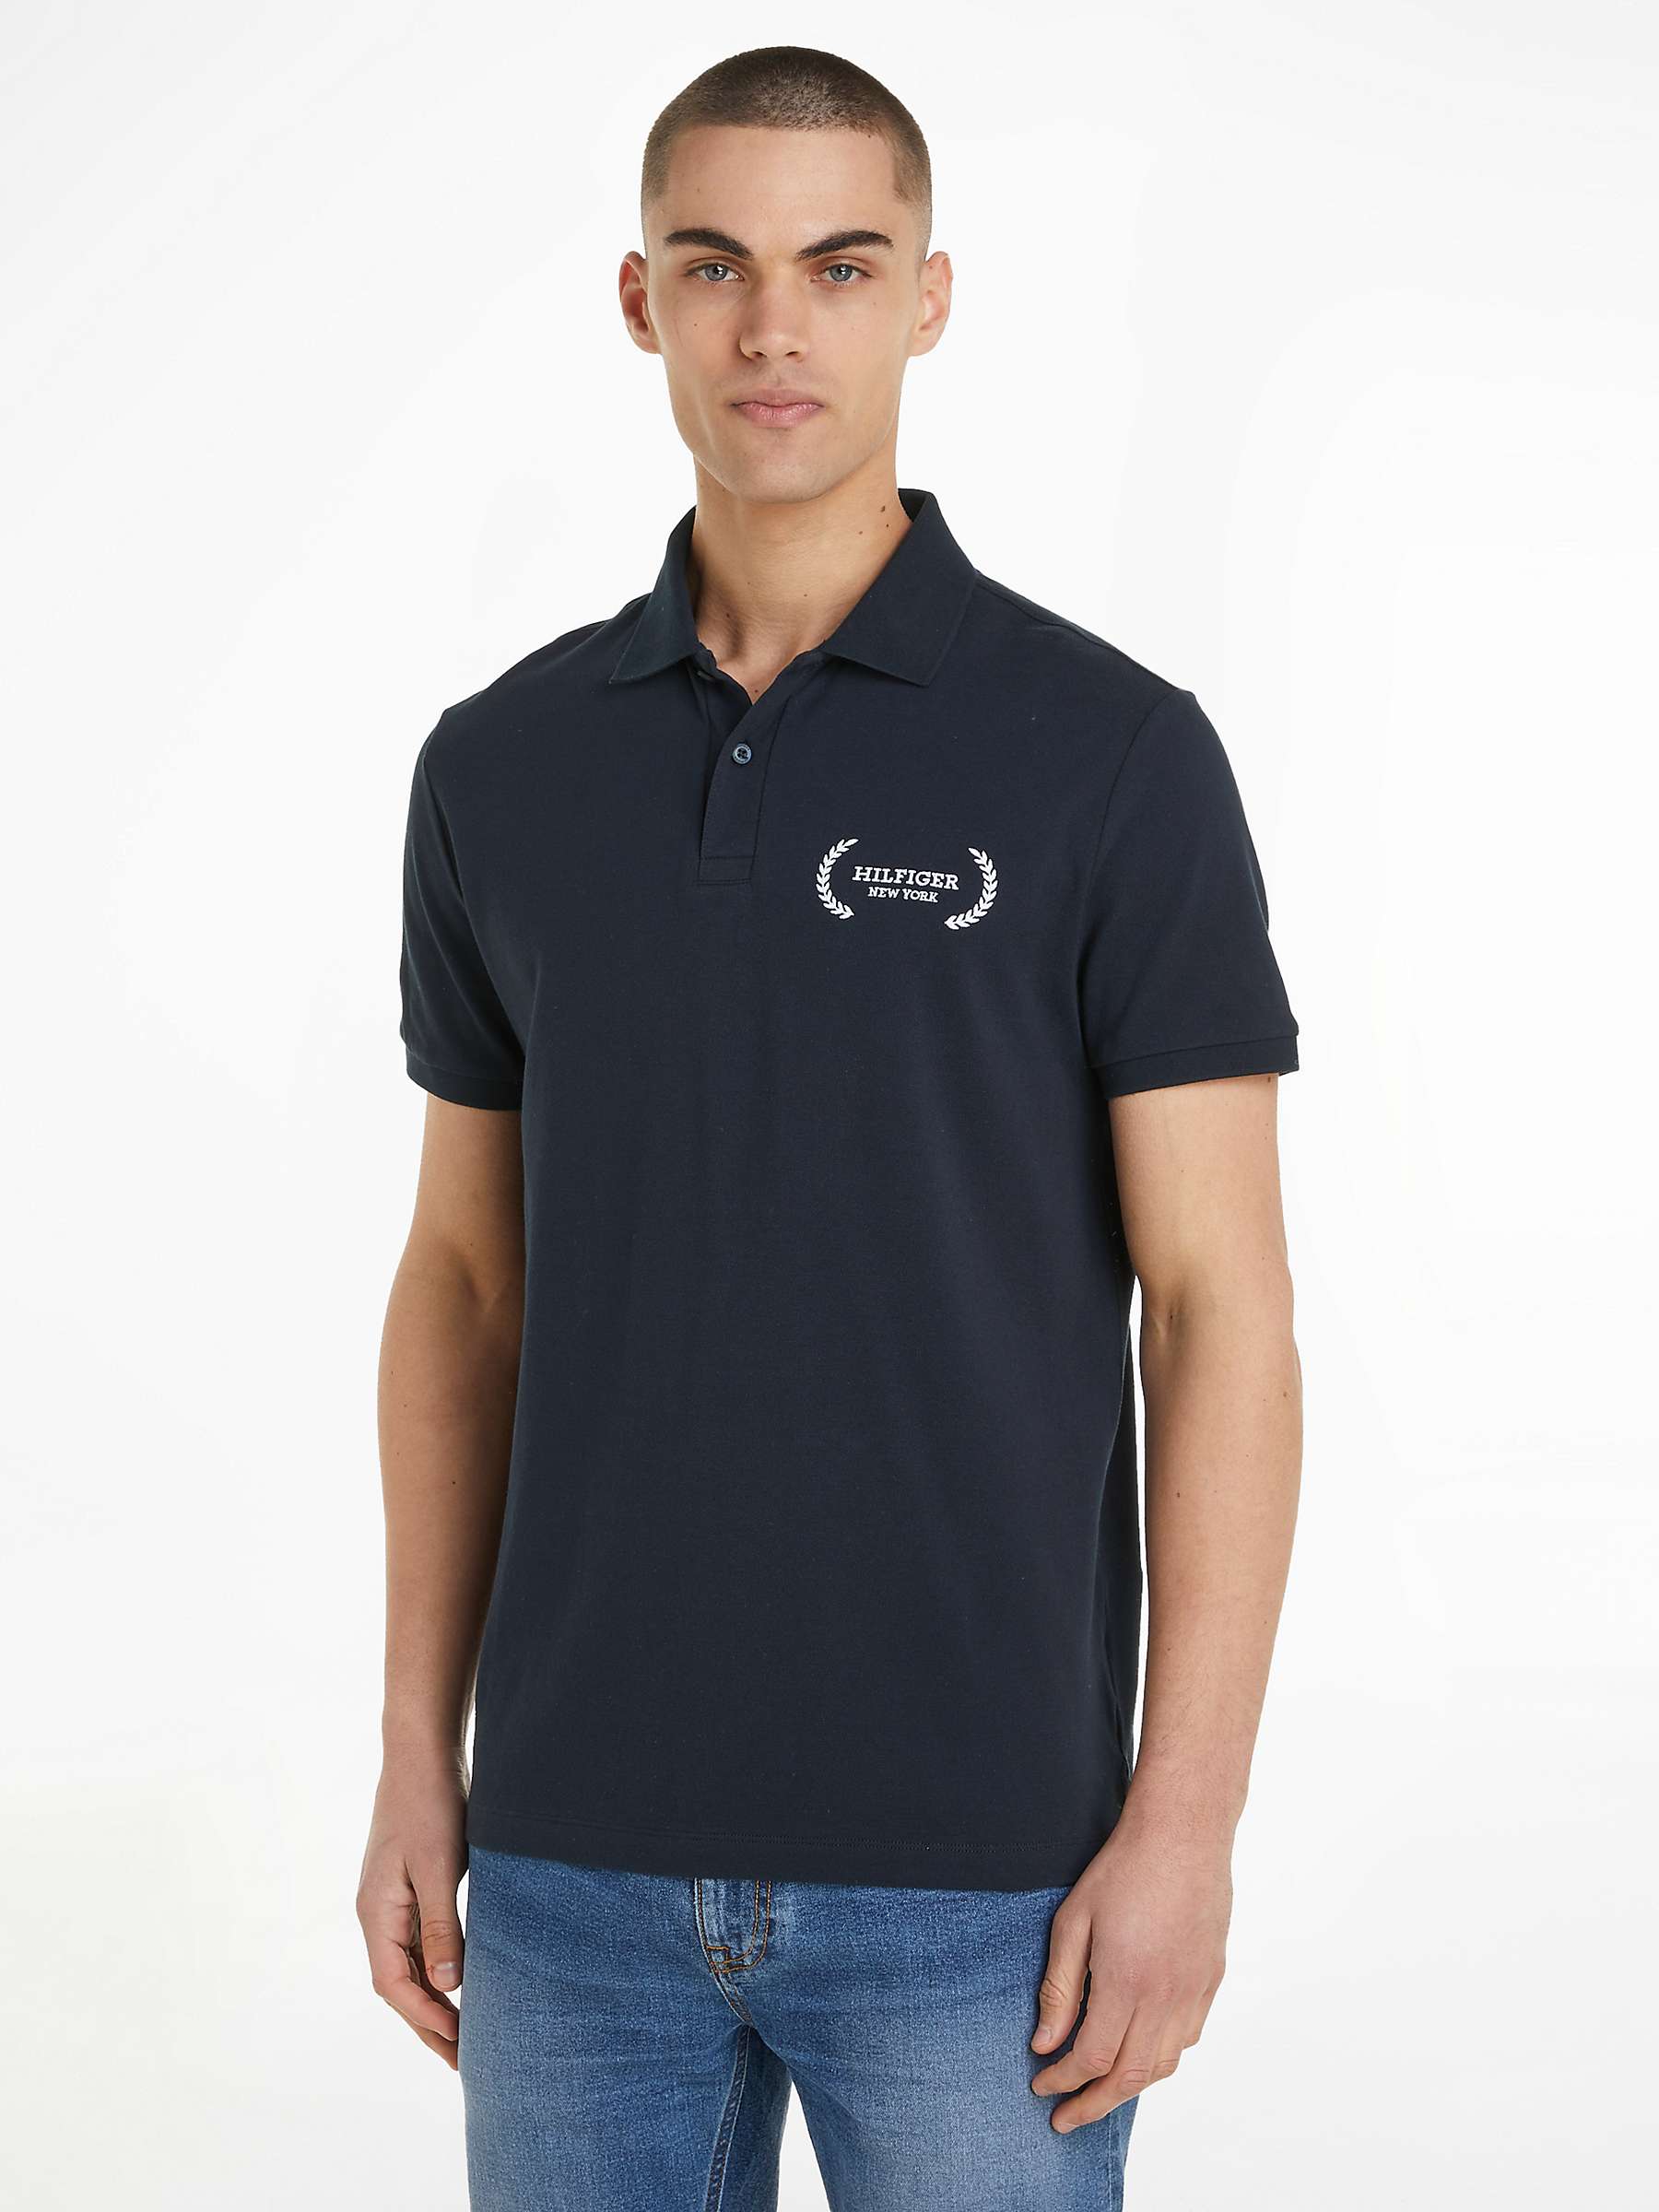 Buy Tommy Hilfiger Monotype Short Sleeve Polo Top, Desert Sky Online at johnlewis.com